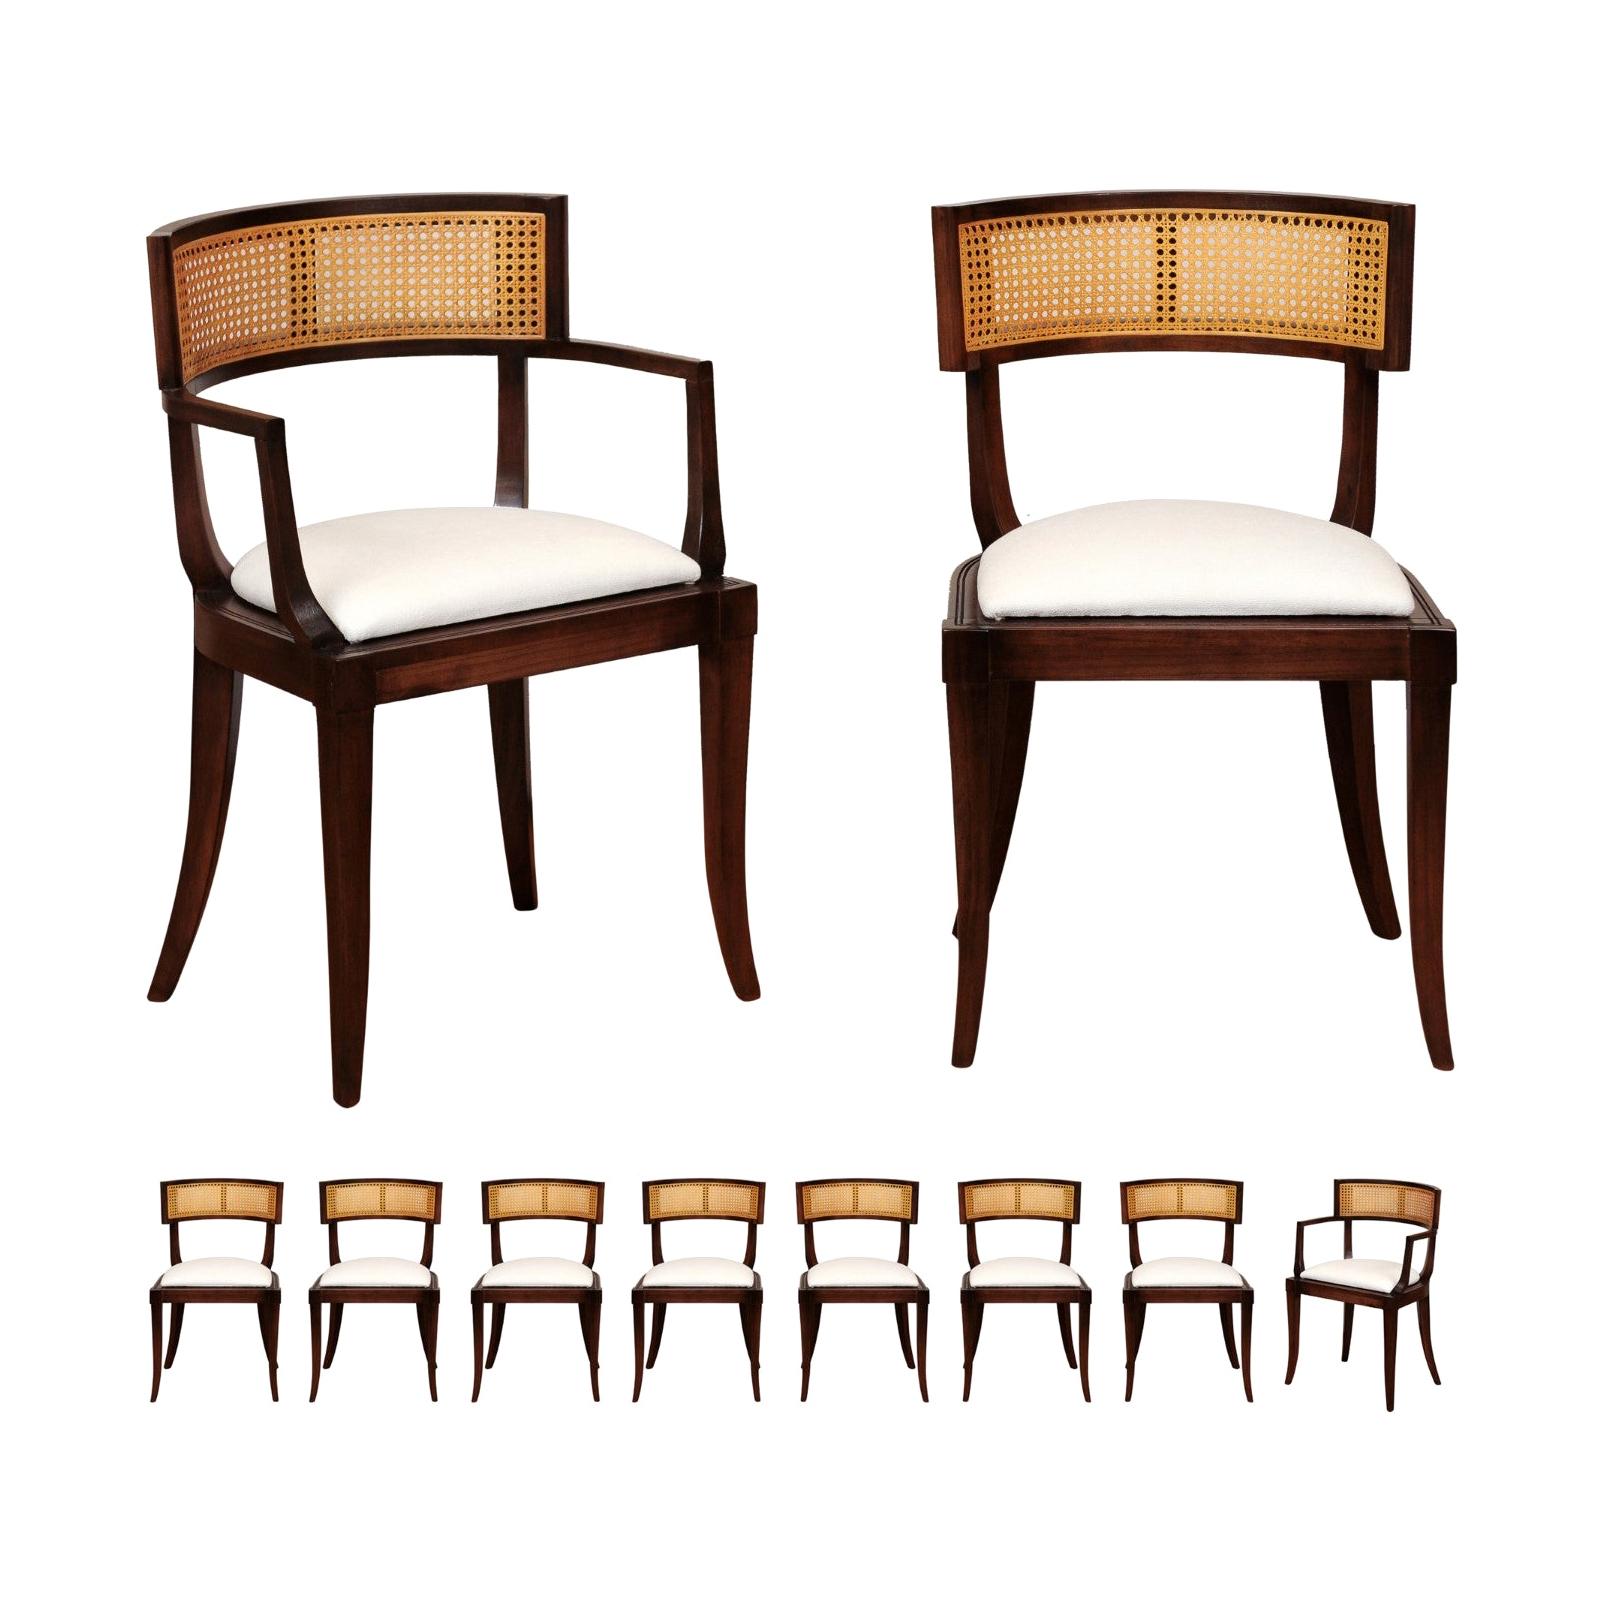 Exquisite Set of Ten 10 Klismos Cane Dining Chairs by Baker, circa 1958